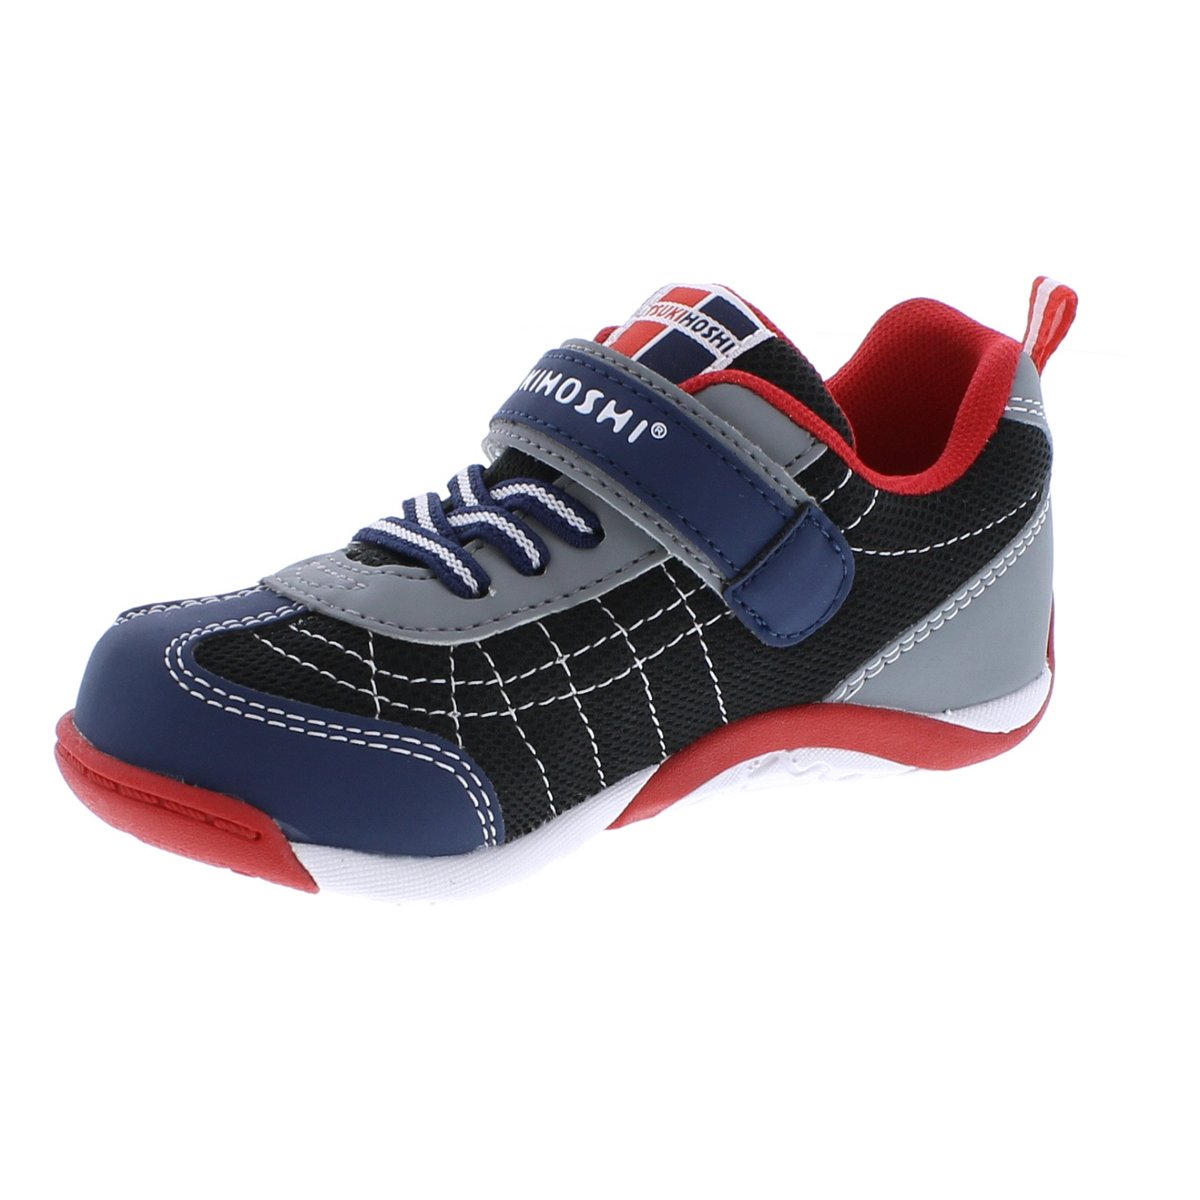 Childrens Tsukihoshi Kaz Sneaker in Navy/Red from the front view